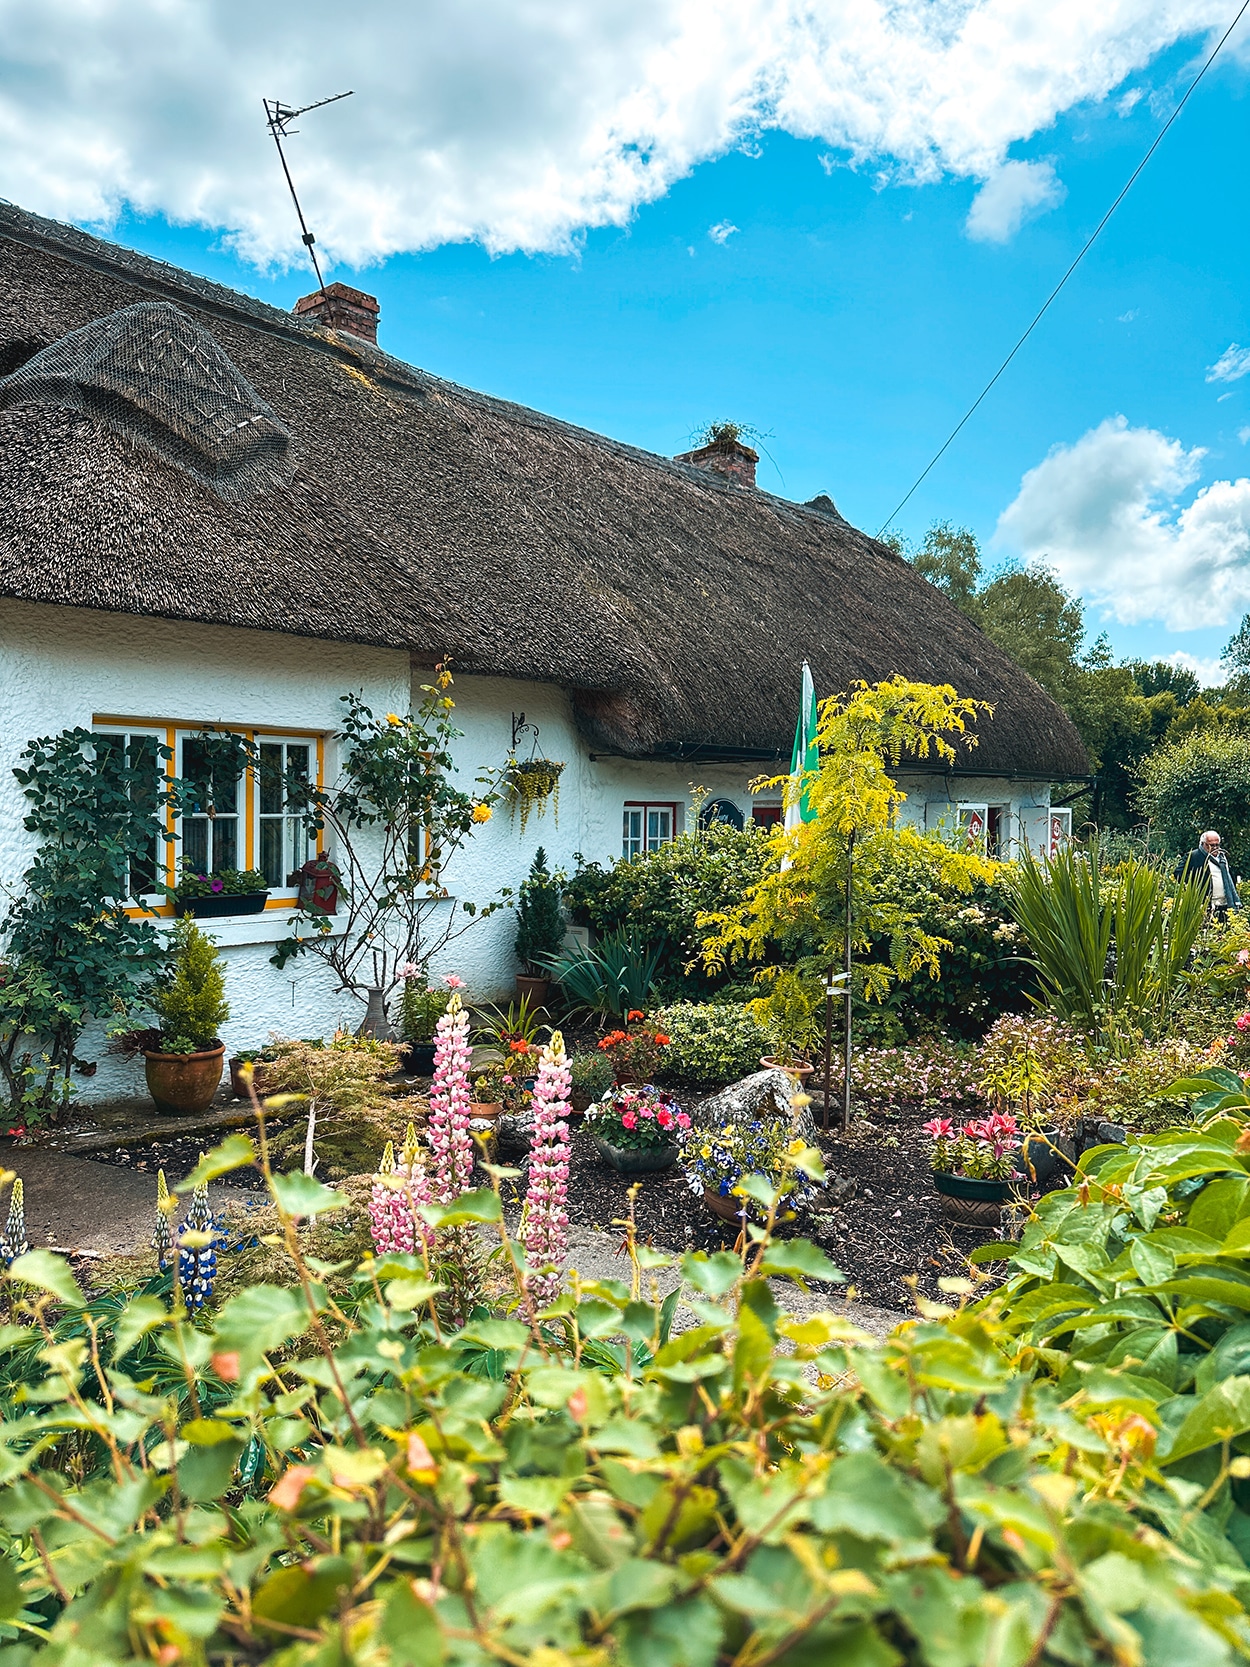 Thatched Roof Cottages in Adare Ireland- credit Keryn Means of Twist Travel Magazine